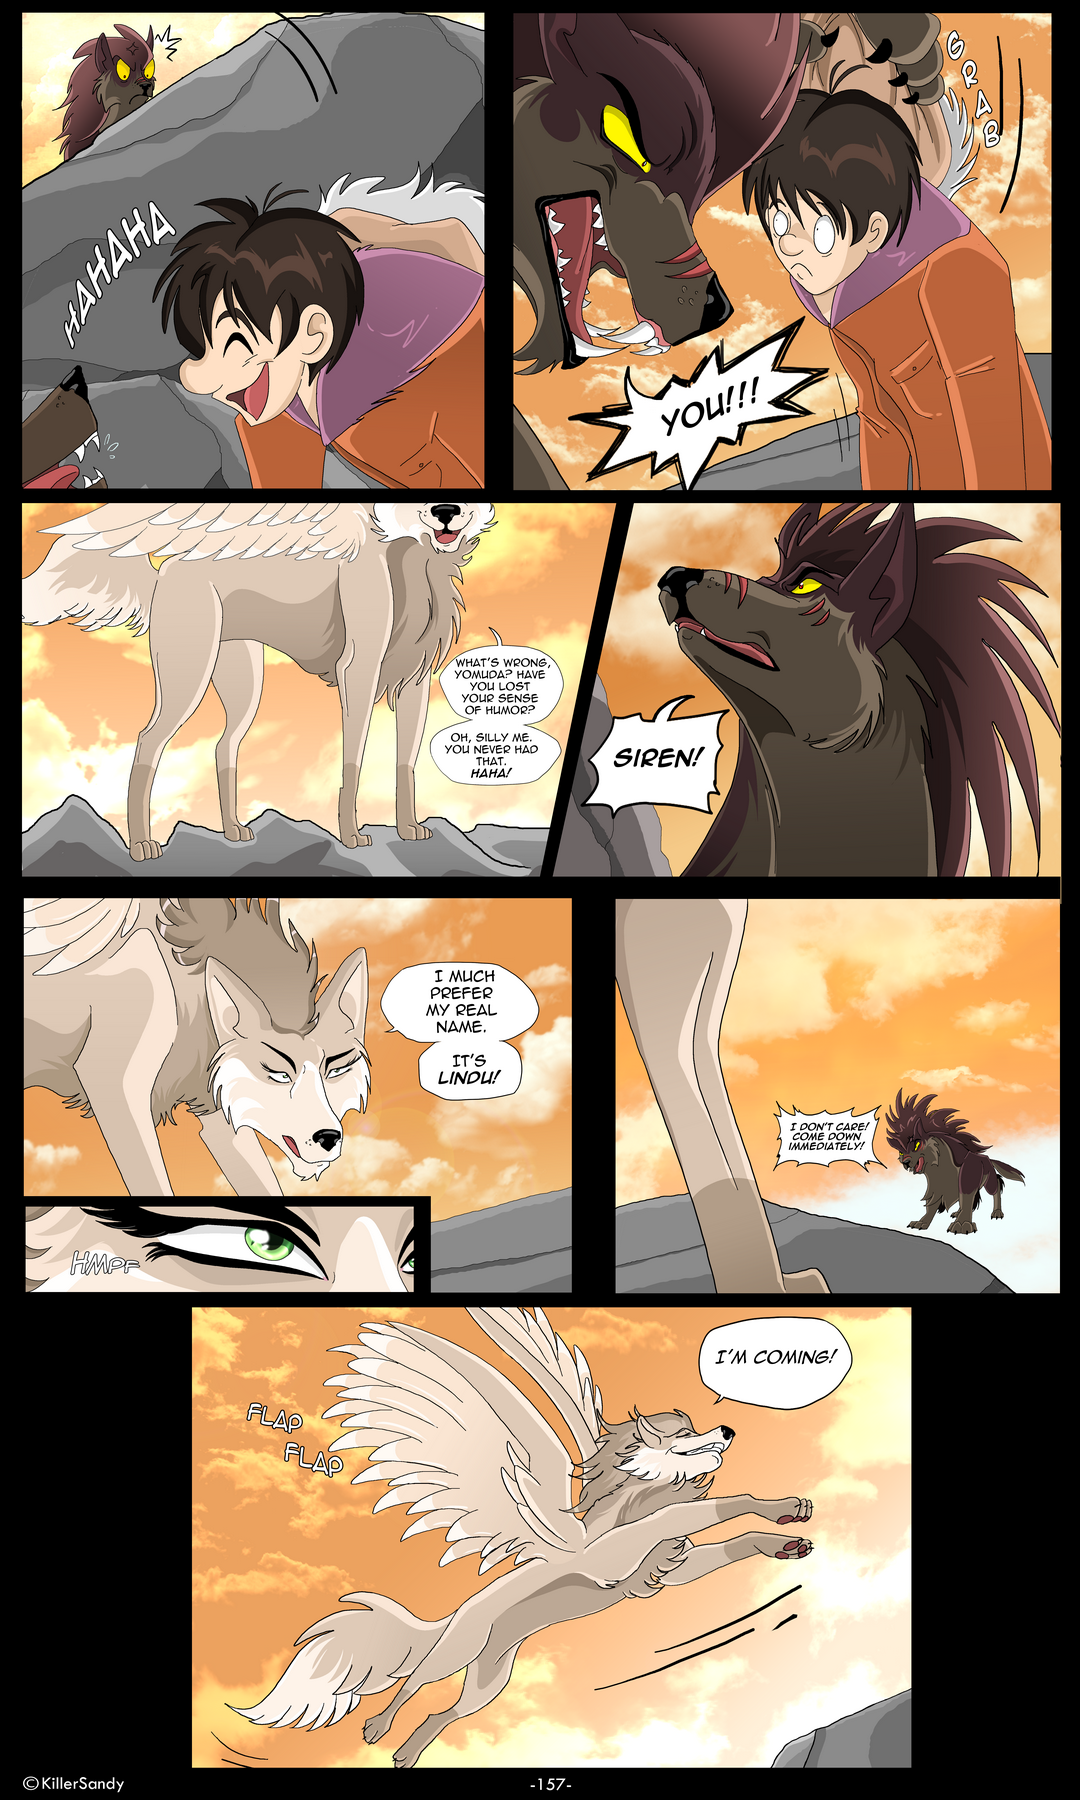 The Prince of the Moonlight Stone page 157